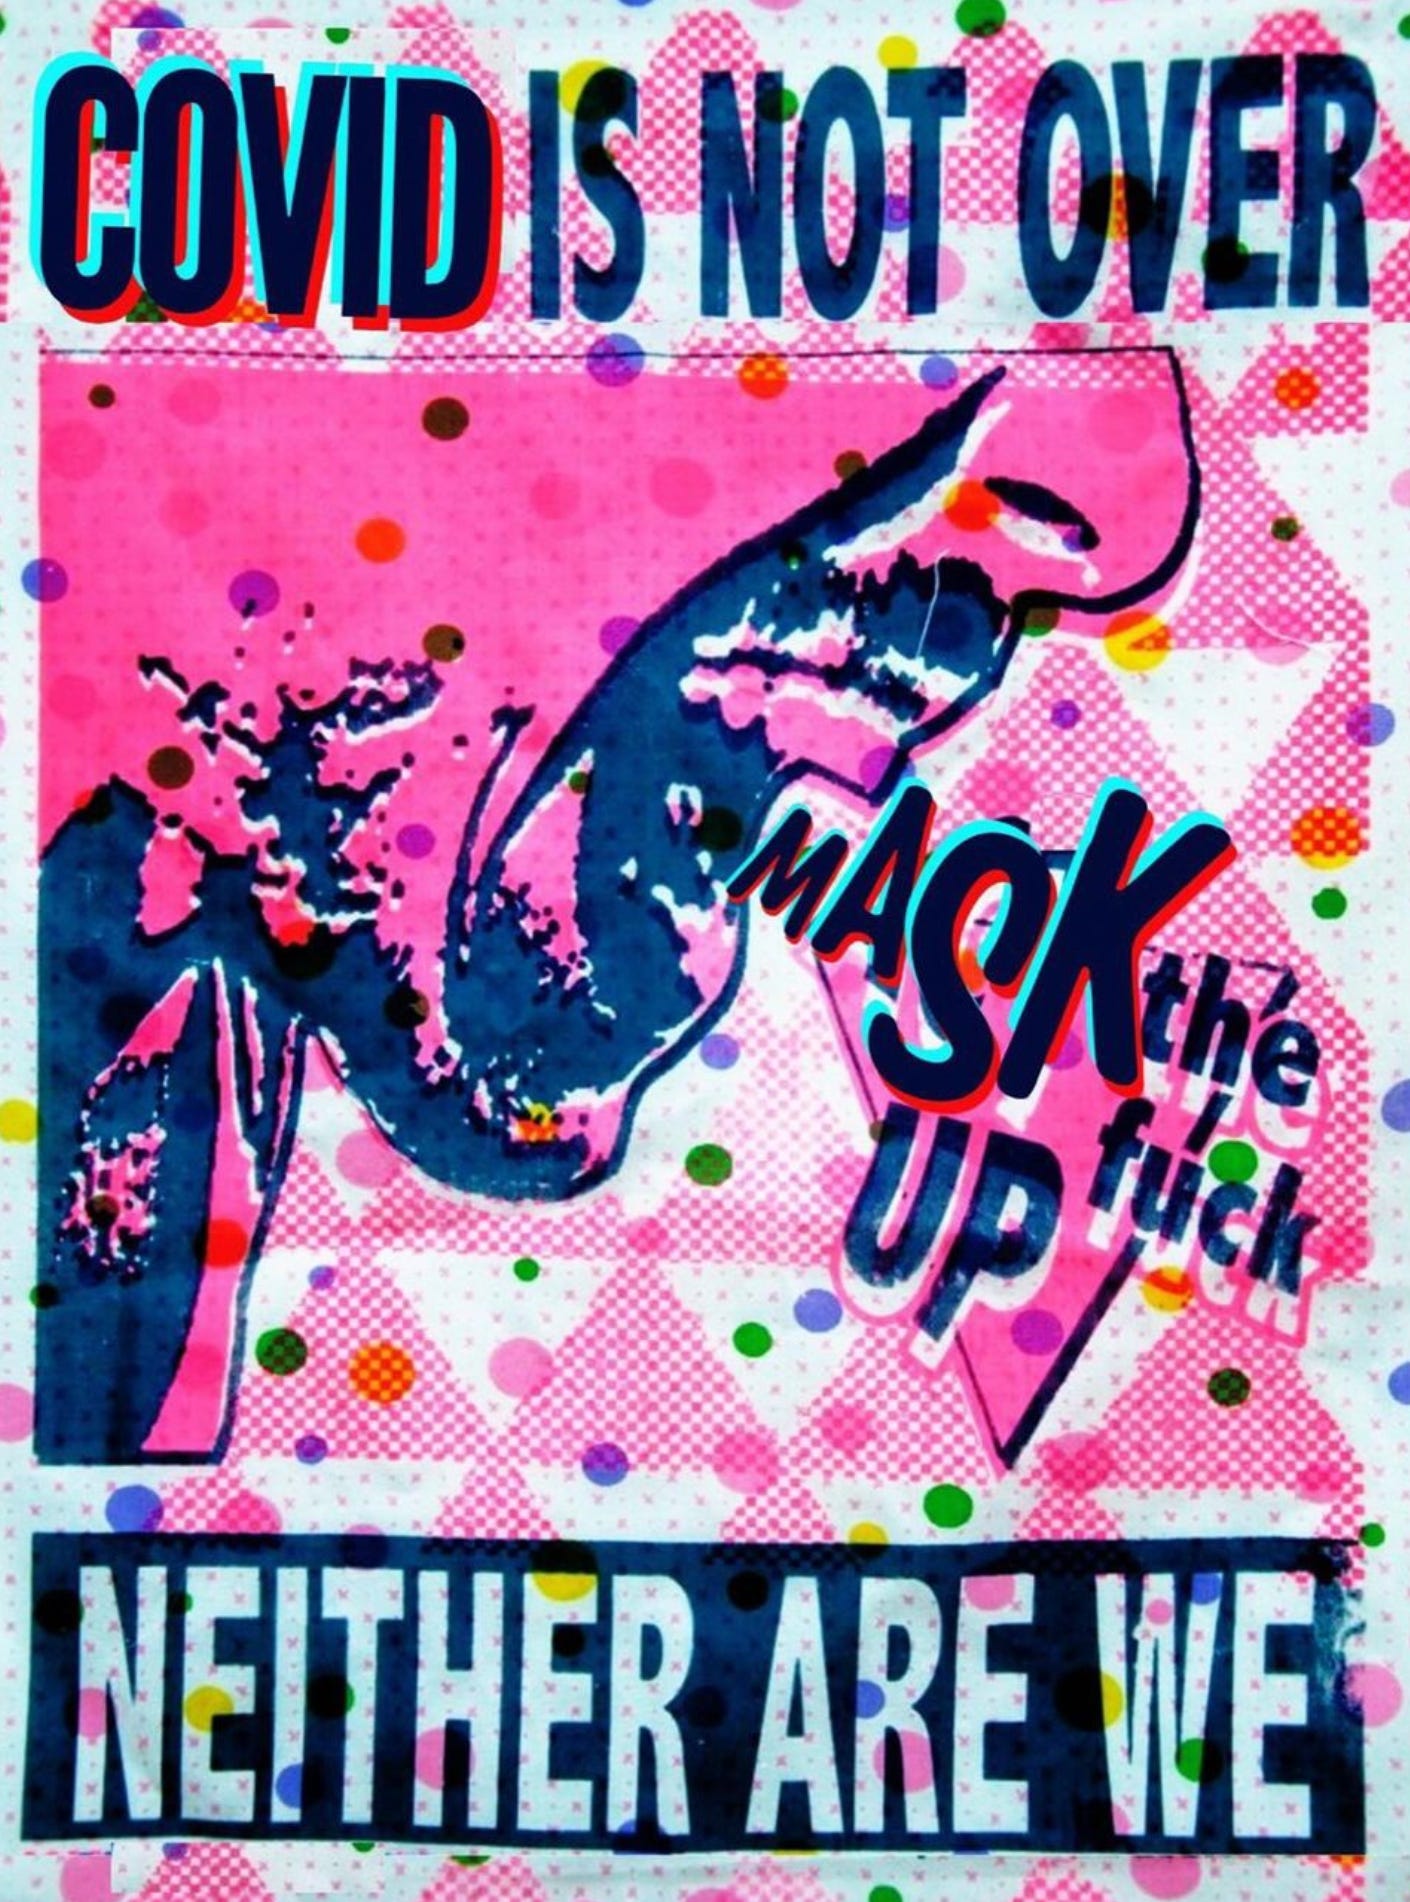 bright pink poster with navy blue text that reads "COVID IS NOT OVER" "NEITHER ARE WE". a person yelling with the words "MASK the fuck UP" coming out of their mouth, on top of a large pink triangle.